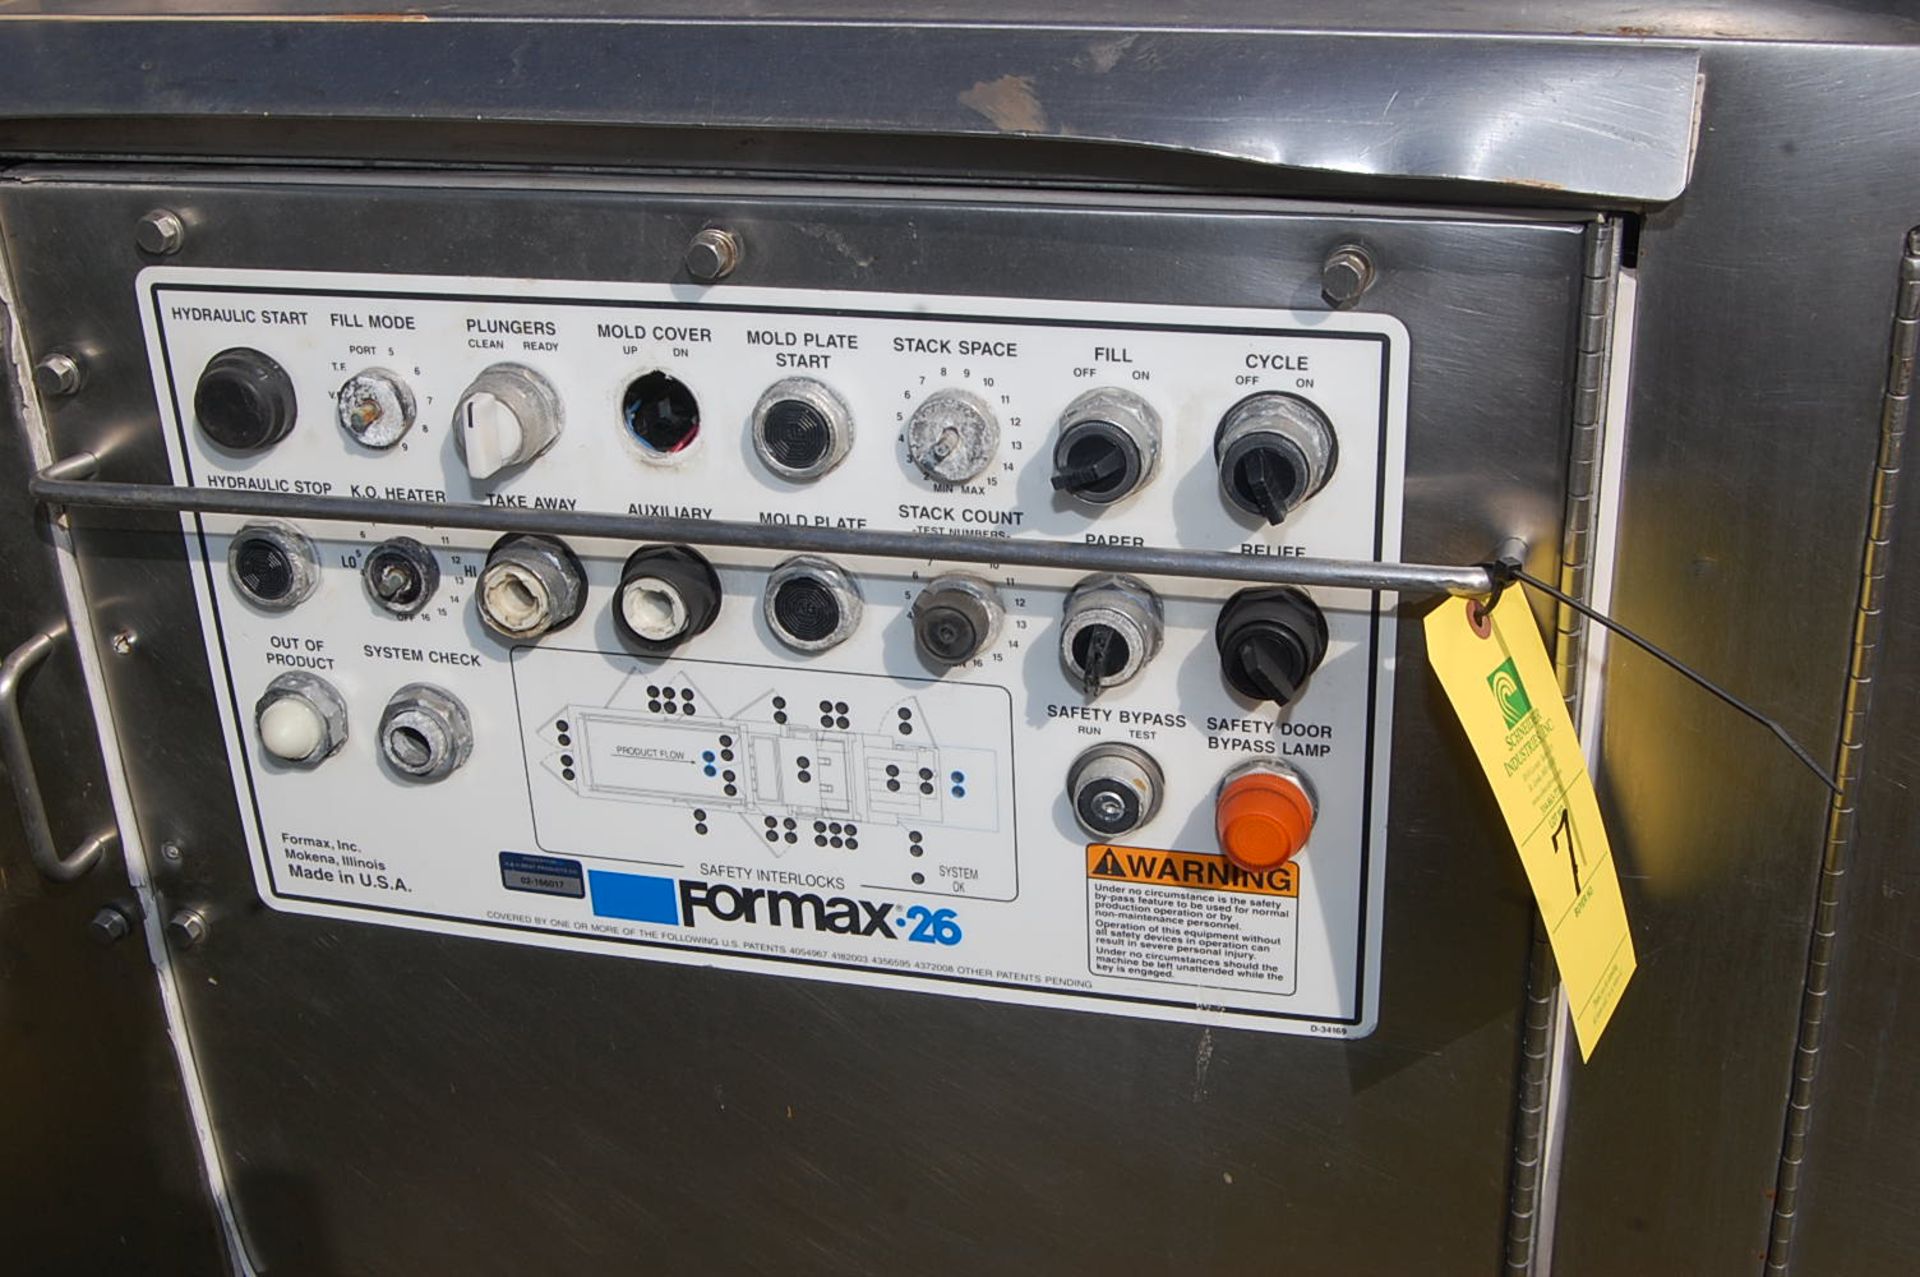 Formax Model #26 Stainless Steel Hamburger/Patty Machine, 26 in. Wide, RIGGING FEE: $250 - Image 3 of 3